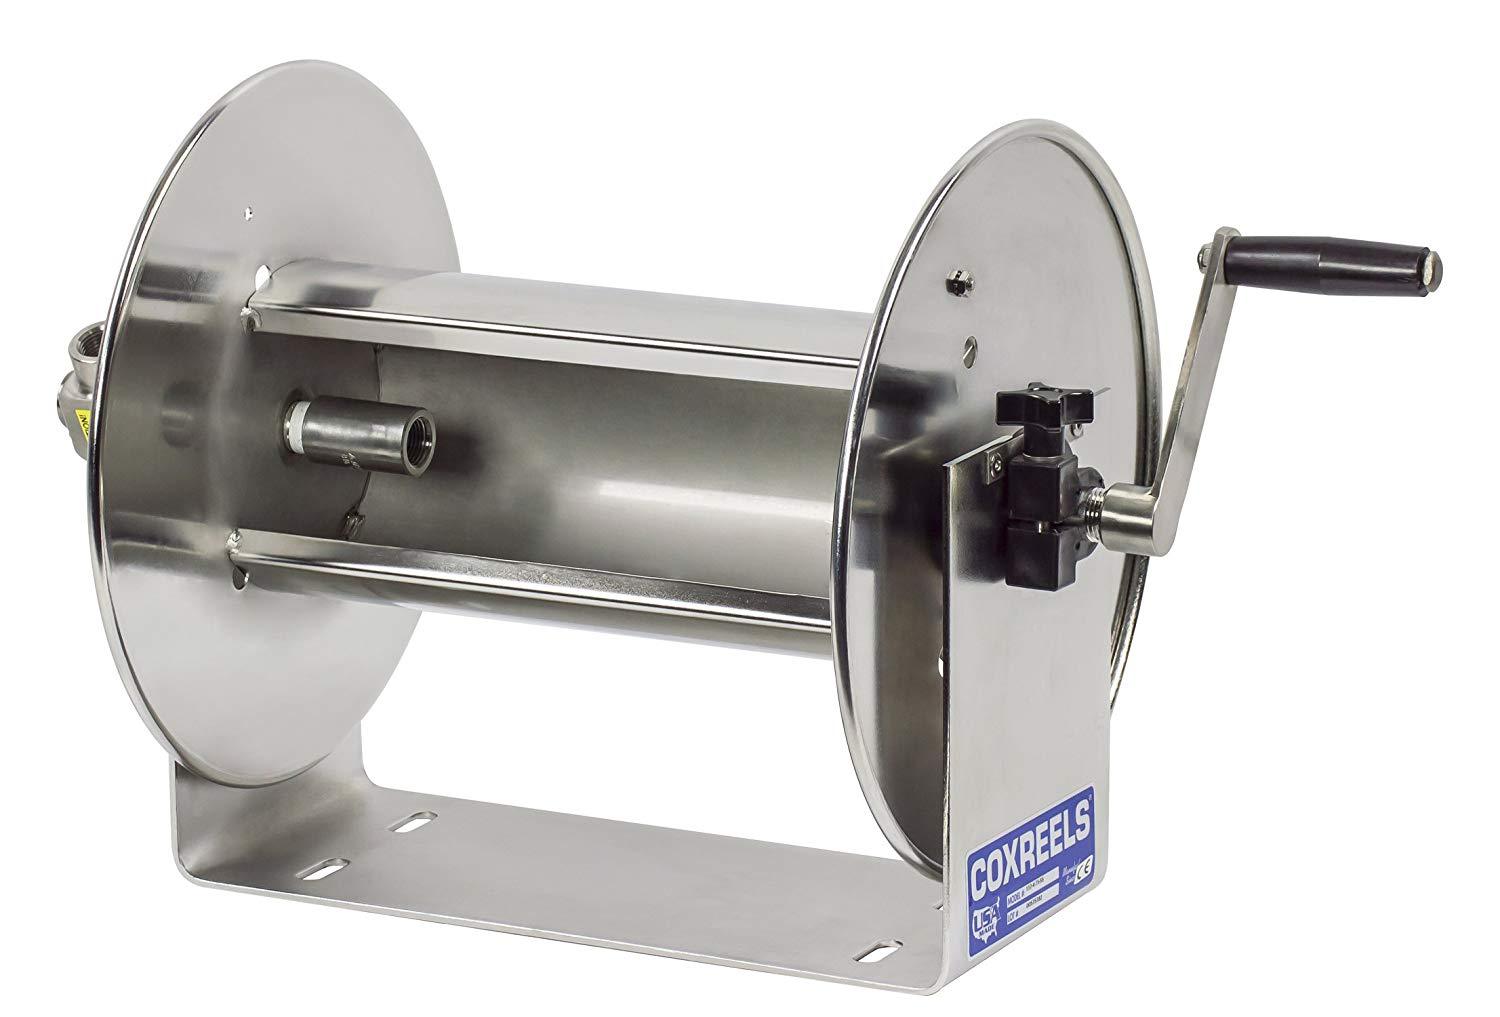 117-5-100-SS : Coxreels 117-5-100-SS Stainless Steel Hand Crank Hose Reel, 3/4" ID, 100' capacity, NO HOSE, 4000psi